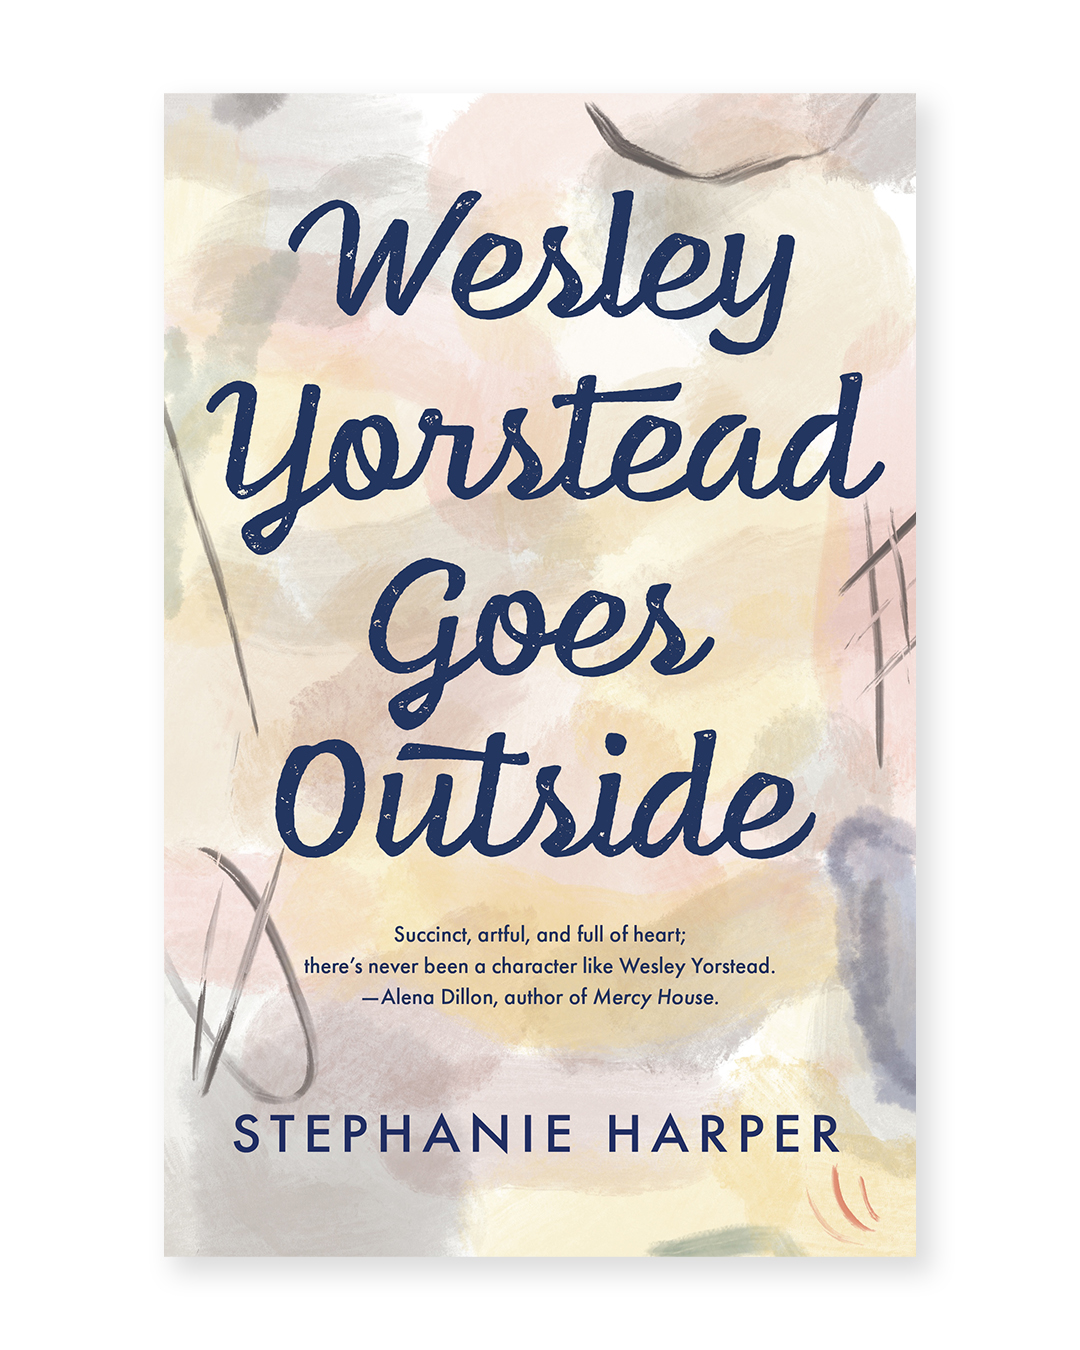 Cover of Wesley Yorstead Goes Outside